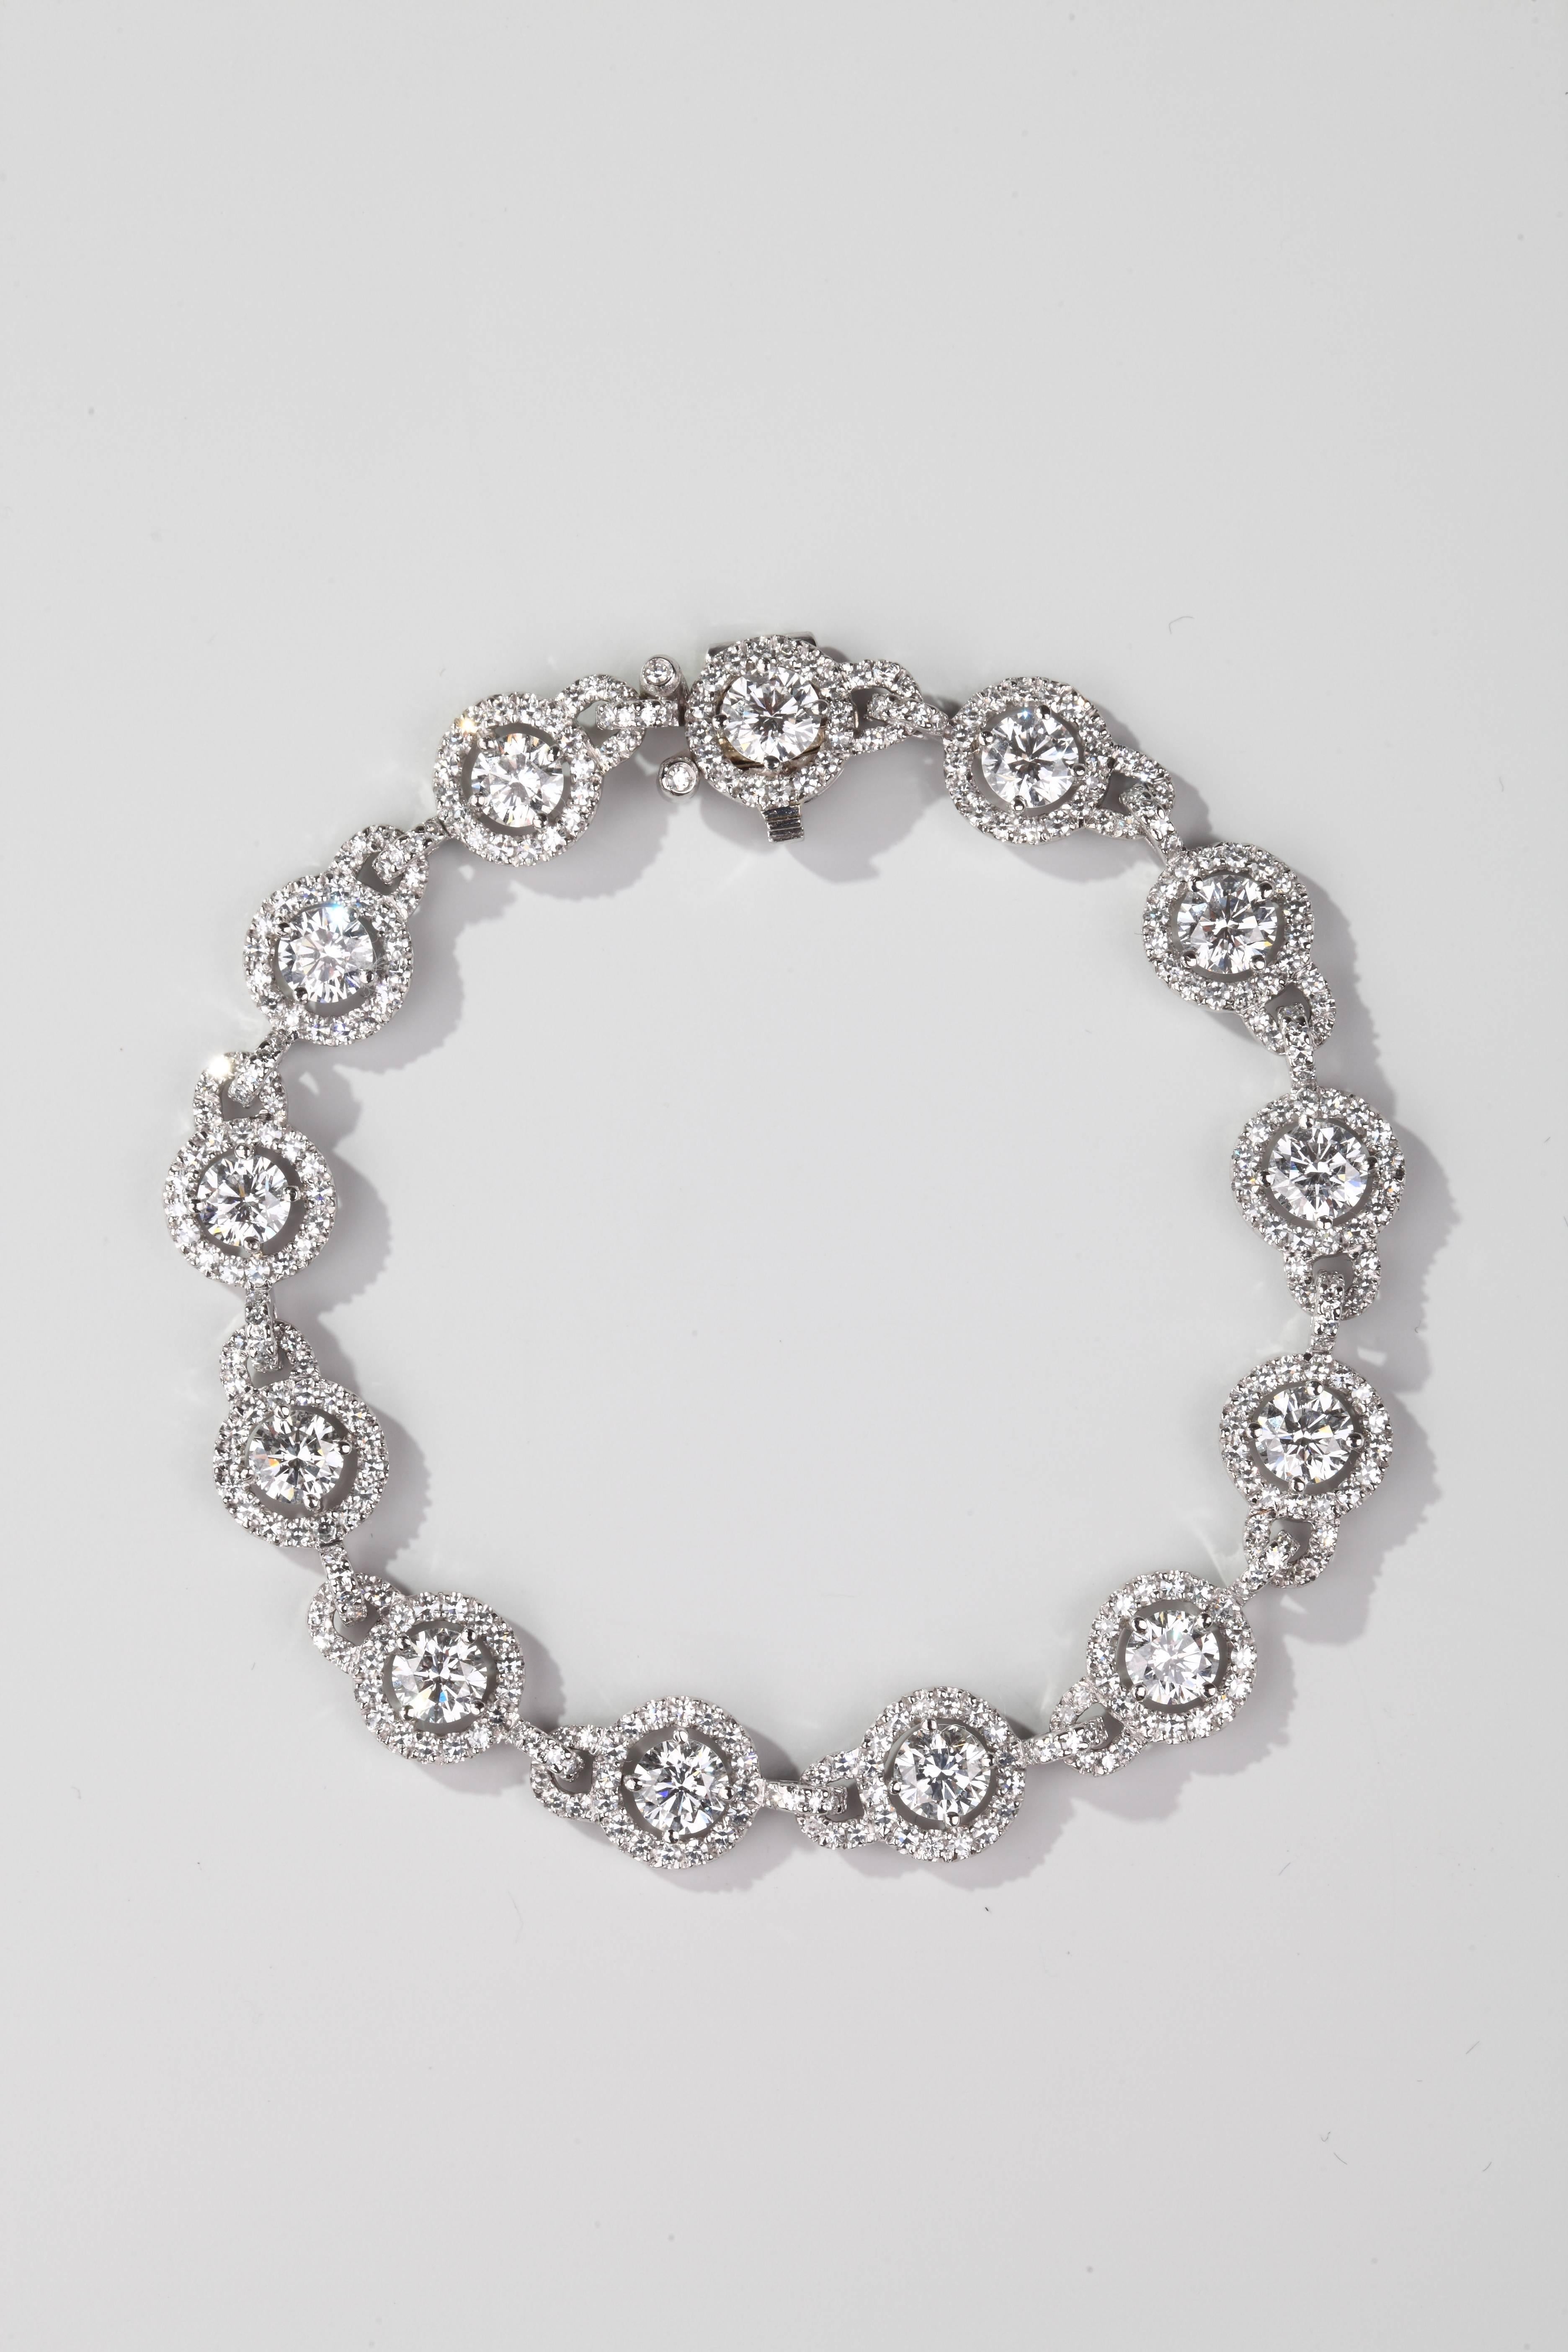 Bracelet in platinum and white gold formed by a line of 13 brillant-cut diamonds (0.30 ct) encircled and fastened by 8/8 cut diamonds.
Signed David Morris.
